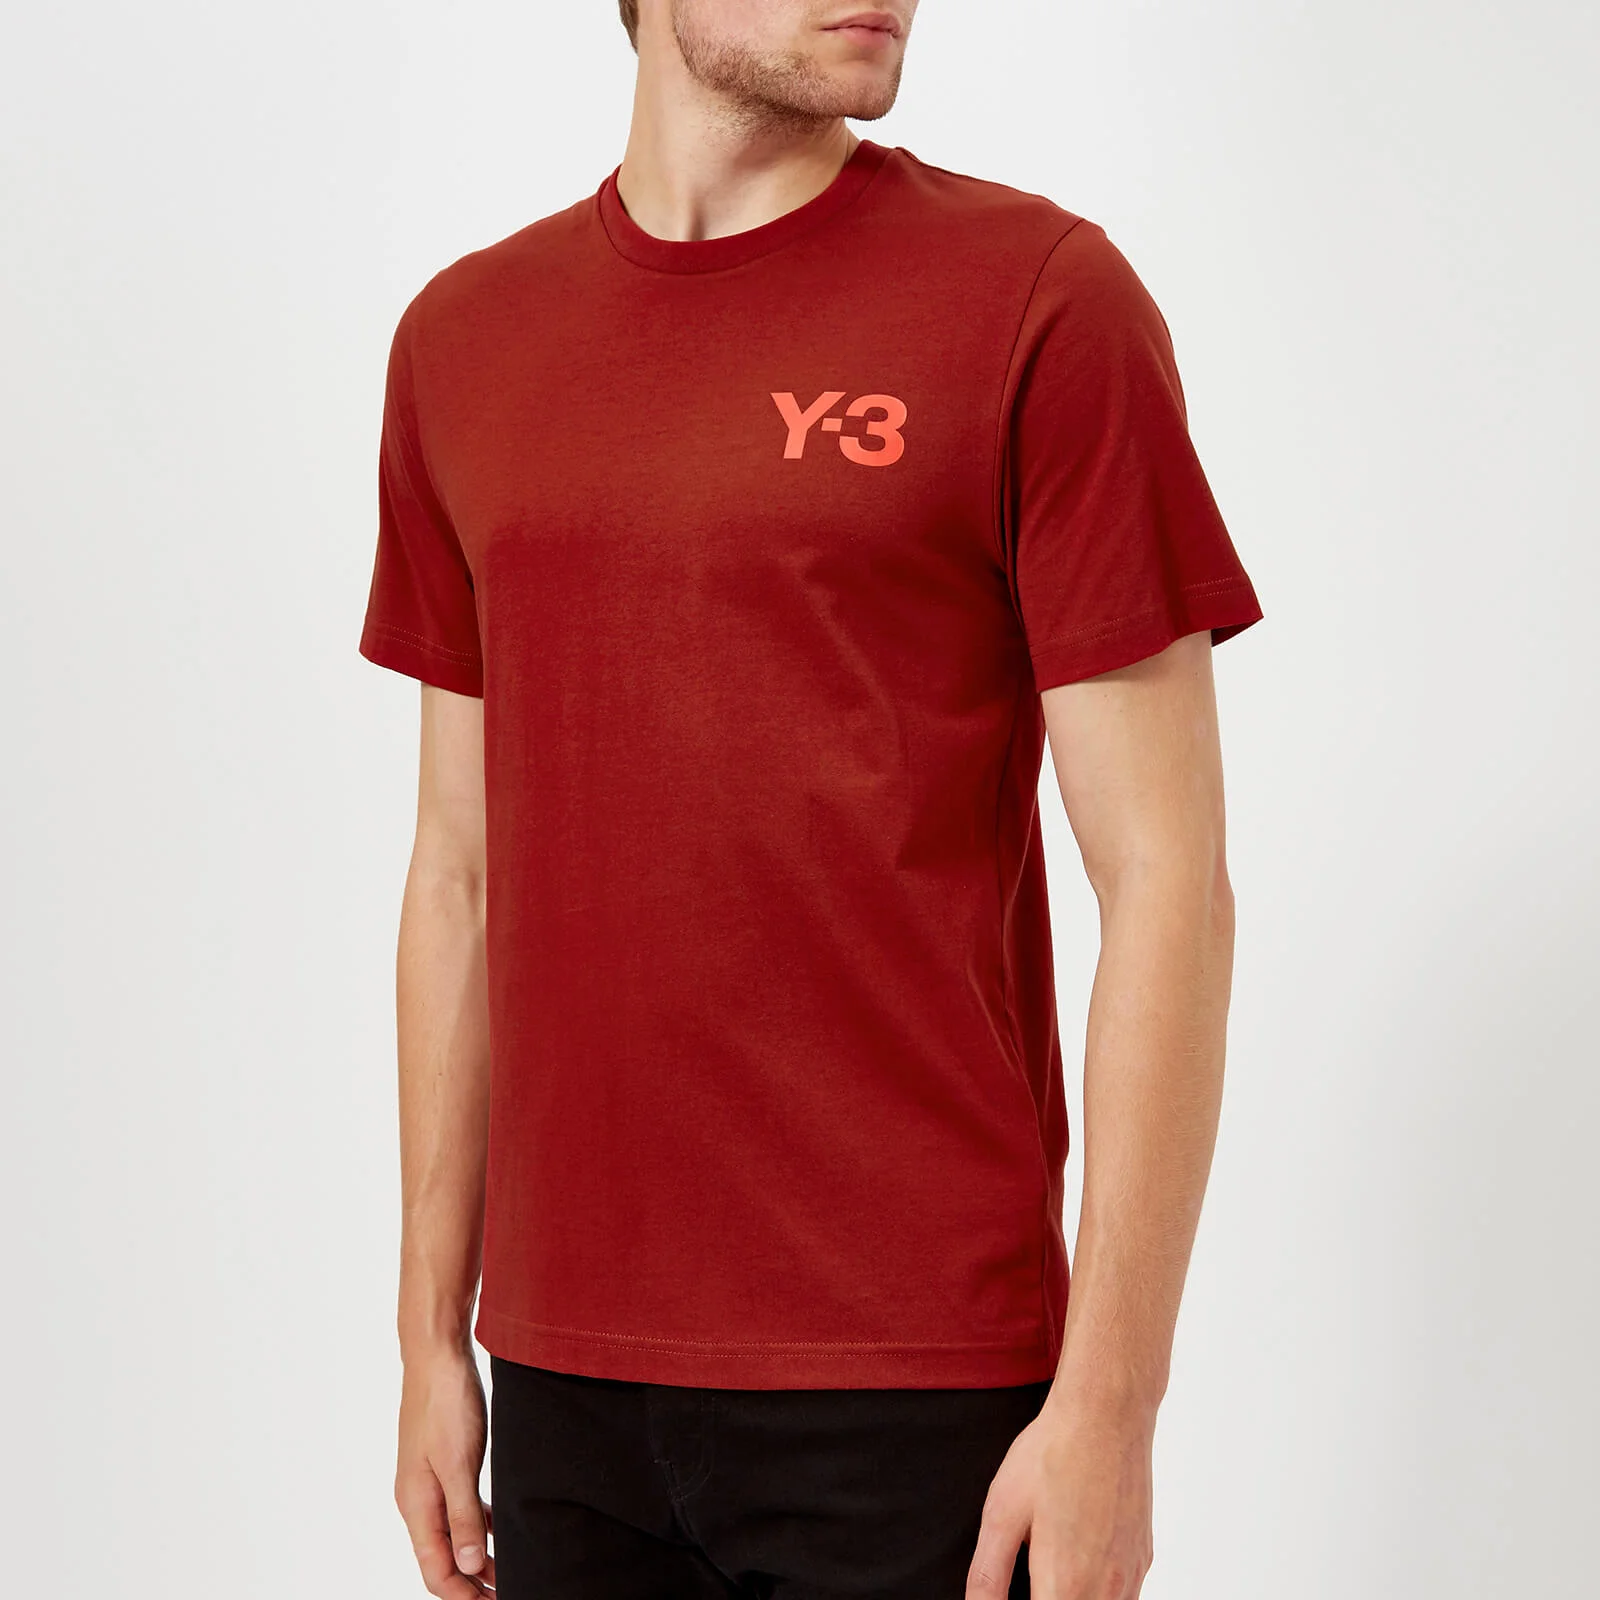 Y-3 Men's Classic Short Sleeve T-Shirt - Rust Red Image 1